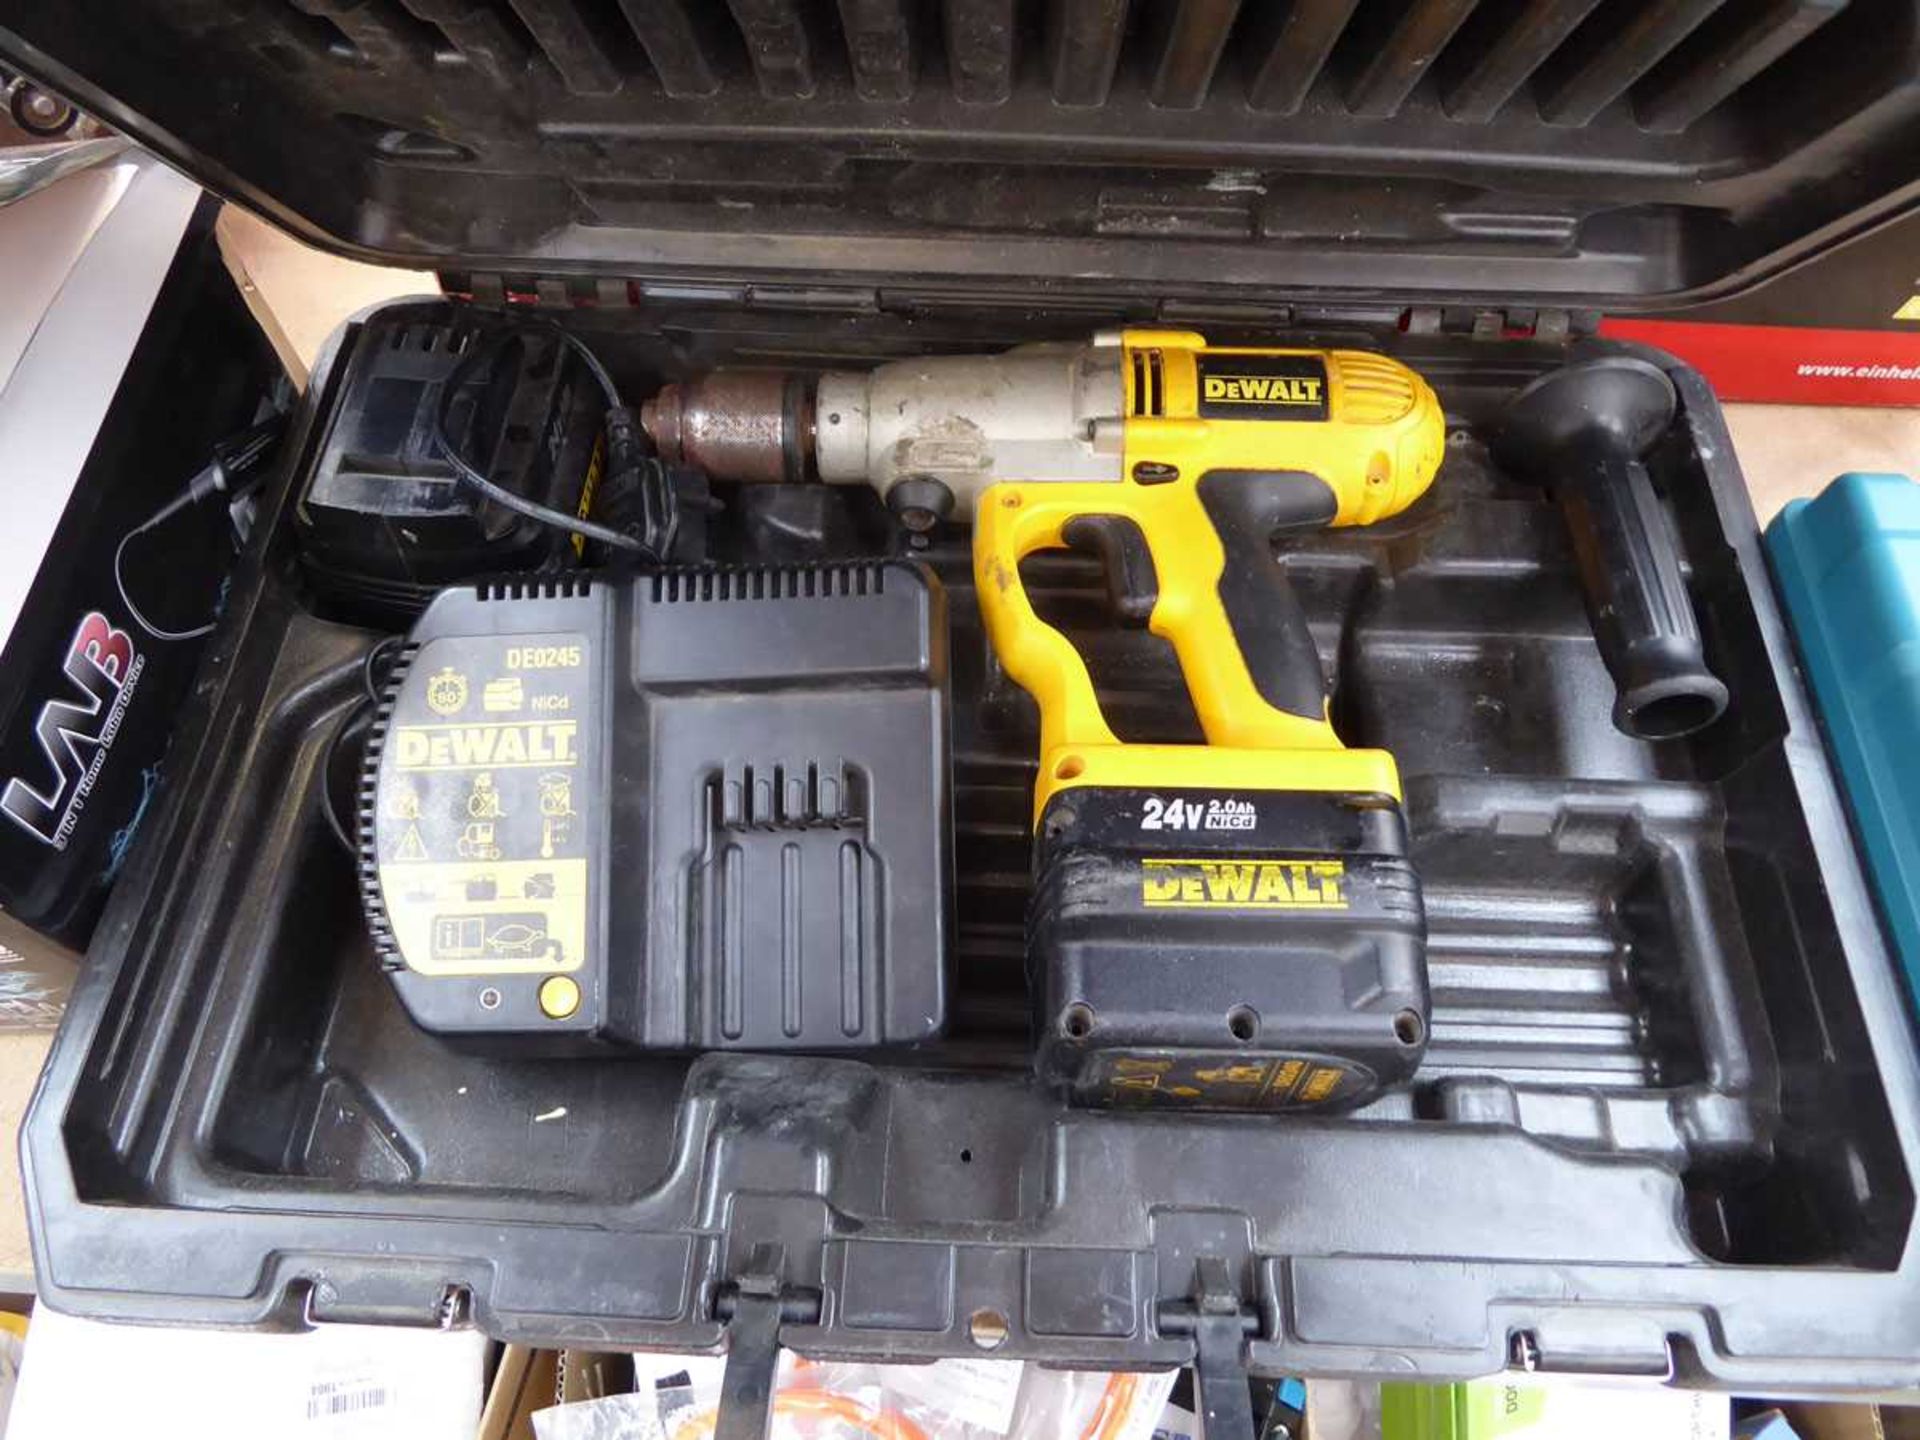 Cased DeWalt hammer drill with 2 batteries and charger